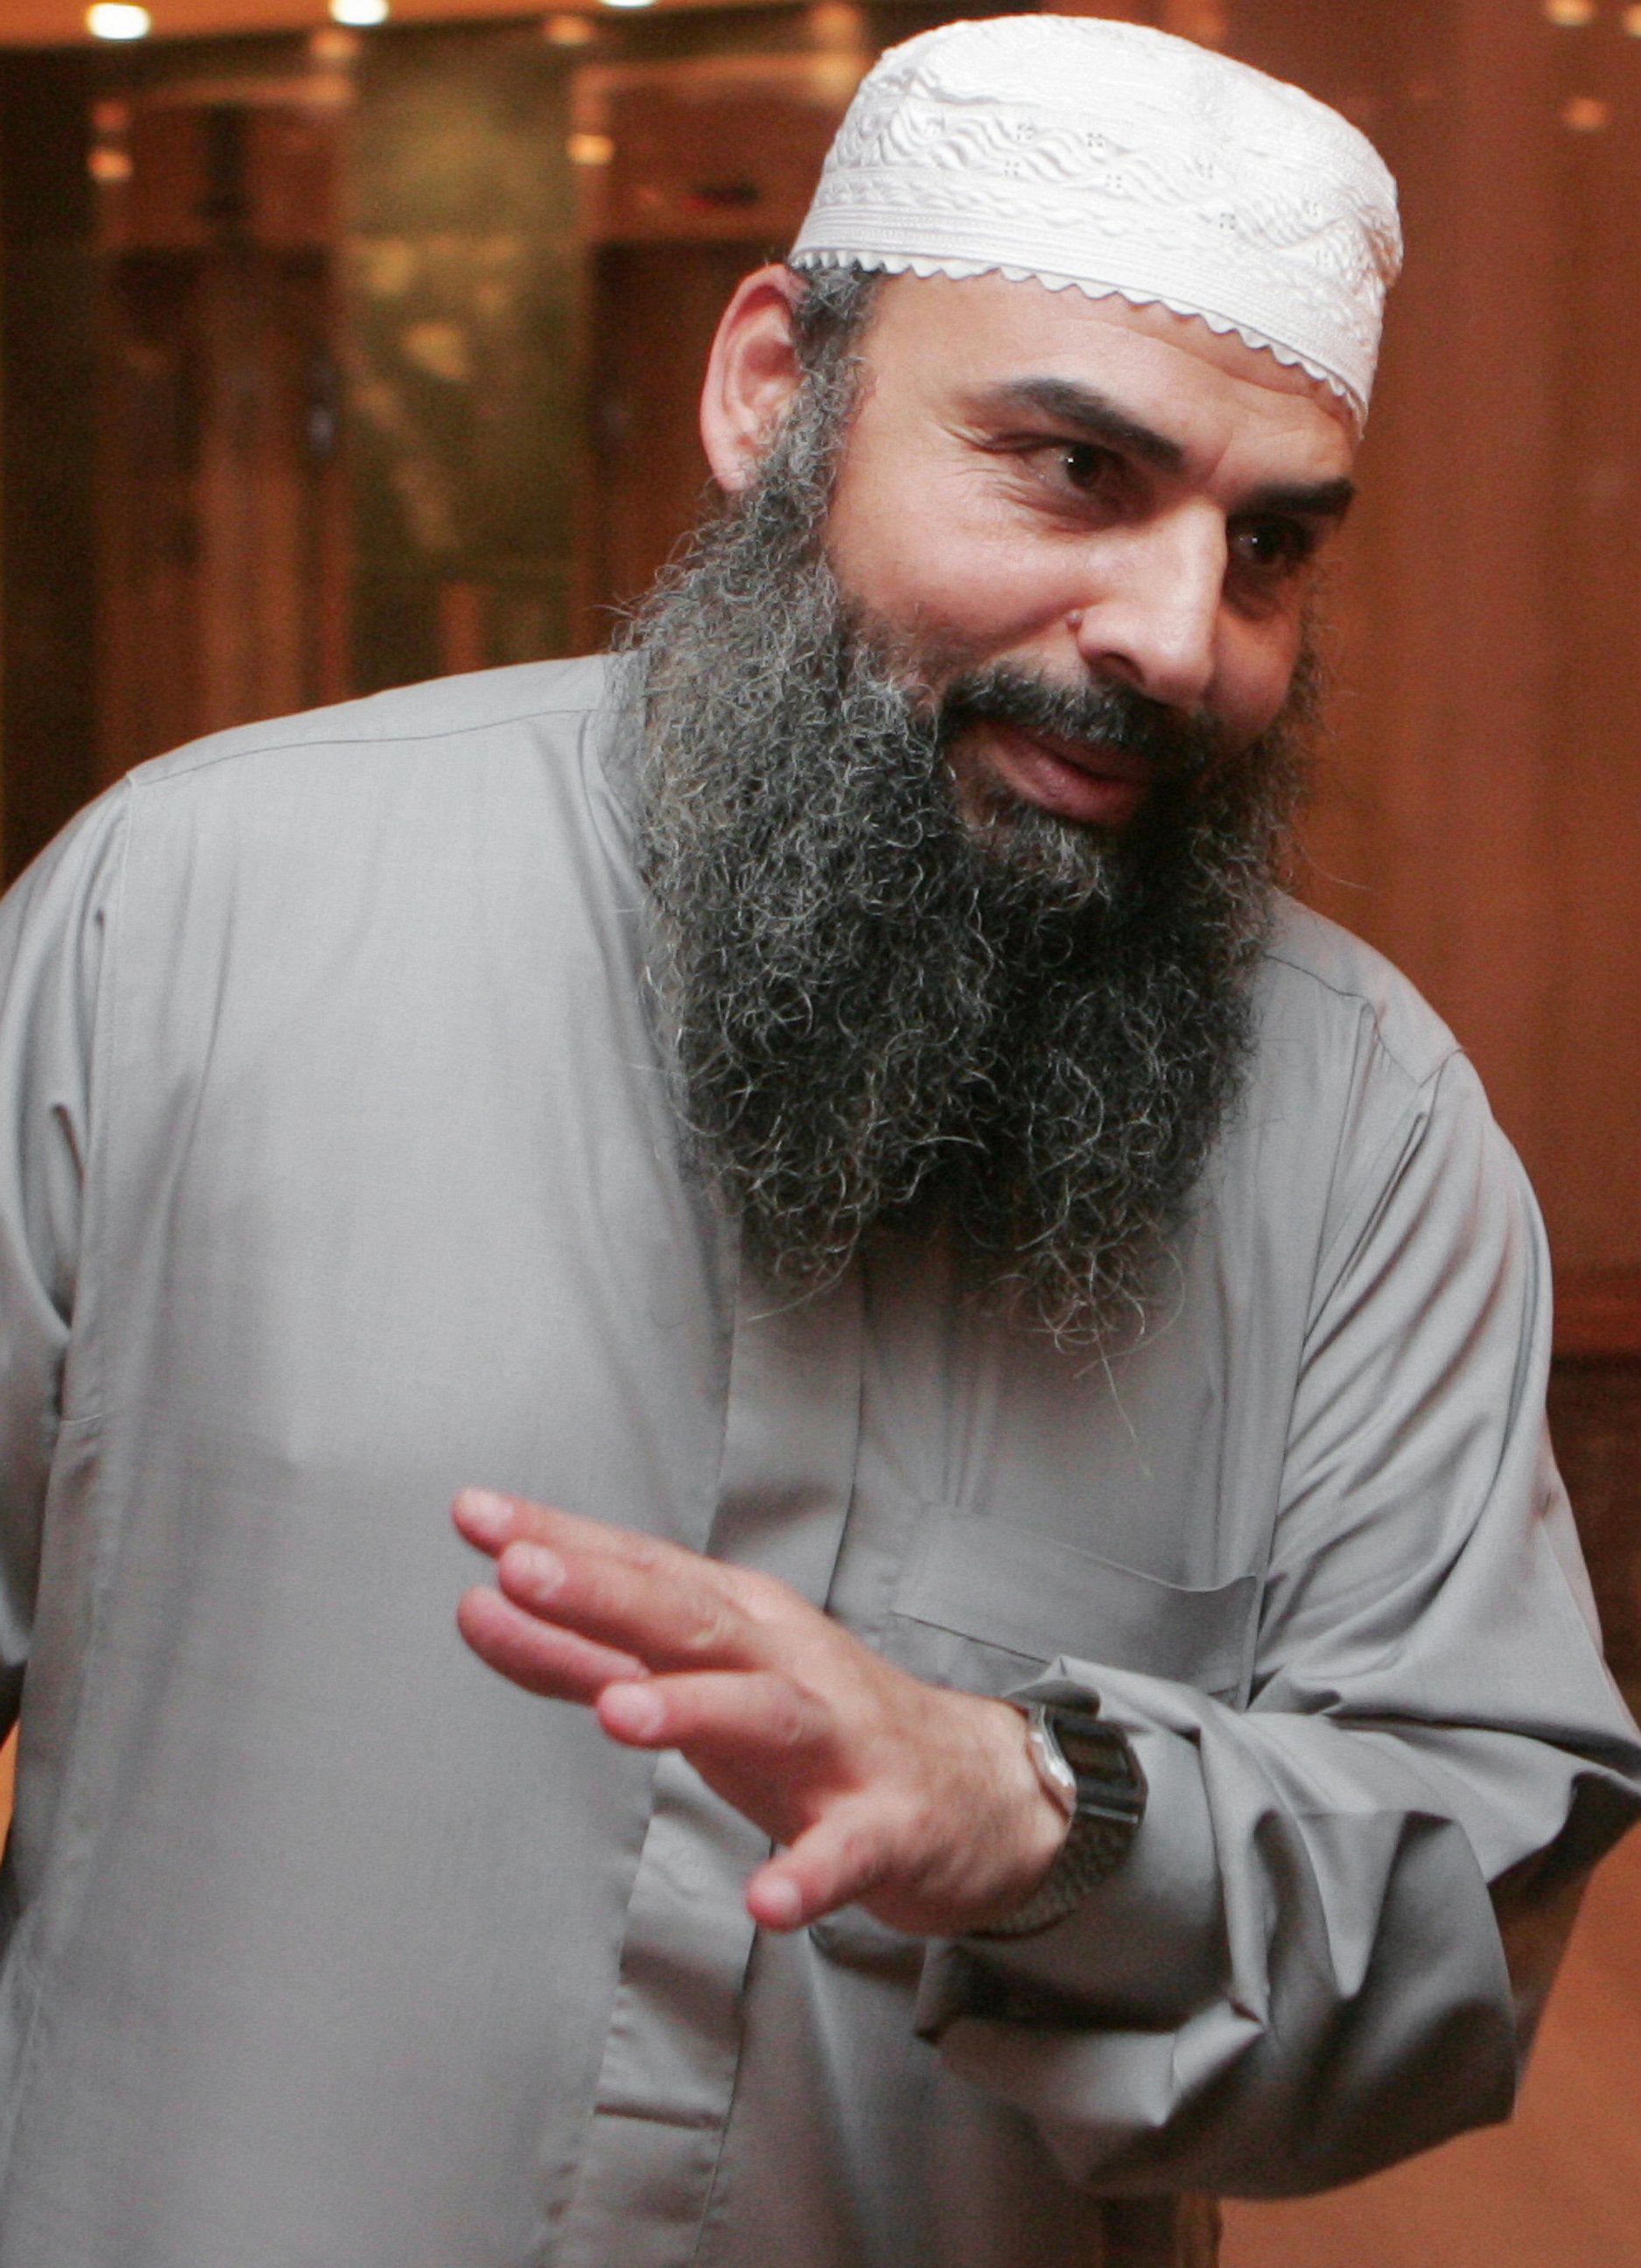 PHOTO: Egyptian cleric Hassan Mustafa Osama Nasr, known as Abu Omar, is seen during an Amnesty International press conference in Cairo in this April 11, 2007 file photo.